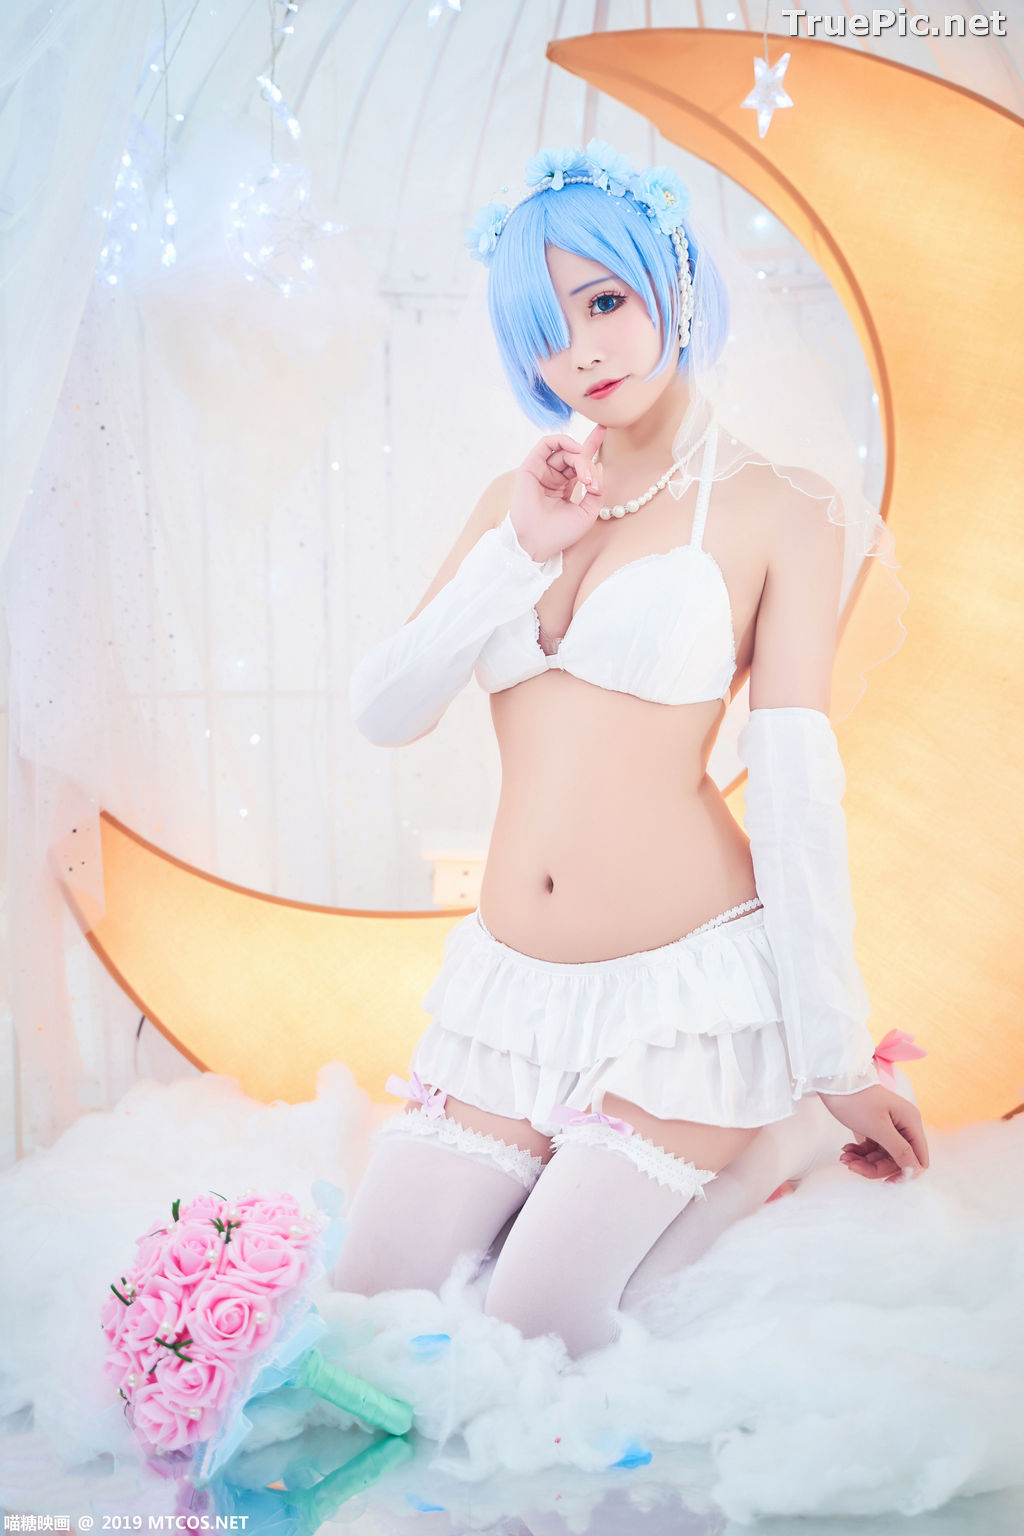 Image [MTCos] 喵糖映画 Vol.043 – Chinese Cute Model – Sexy Rem Cosplay - TruePic.net - Picture-9